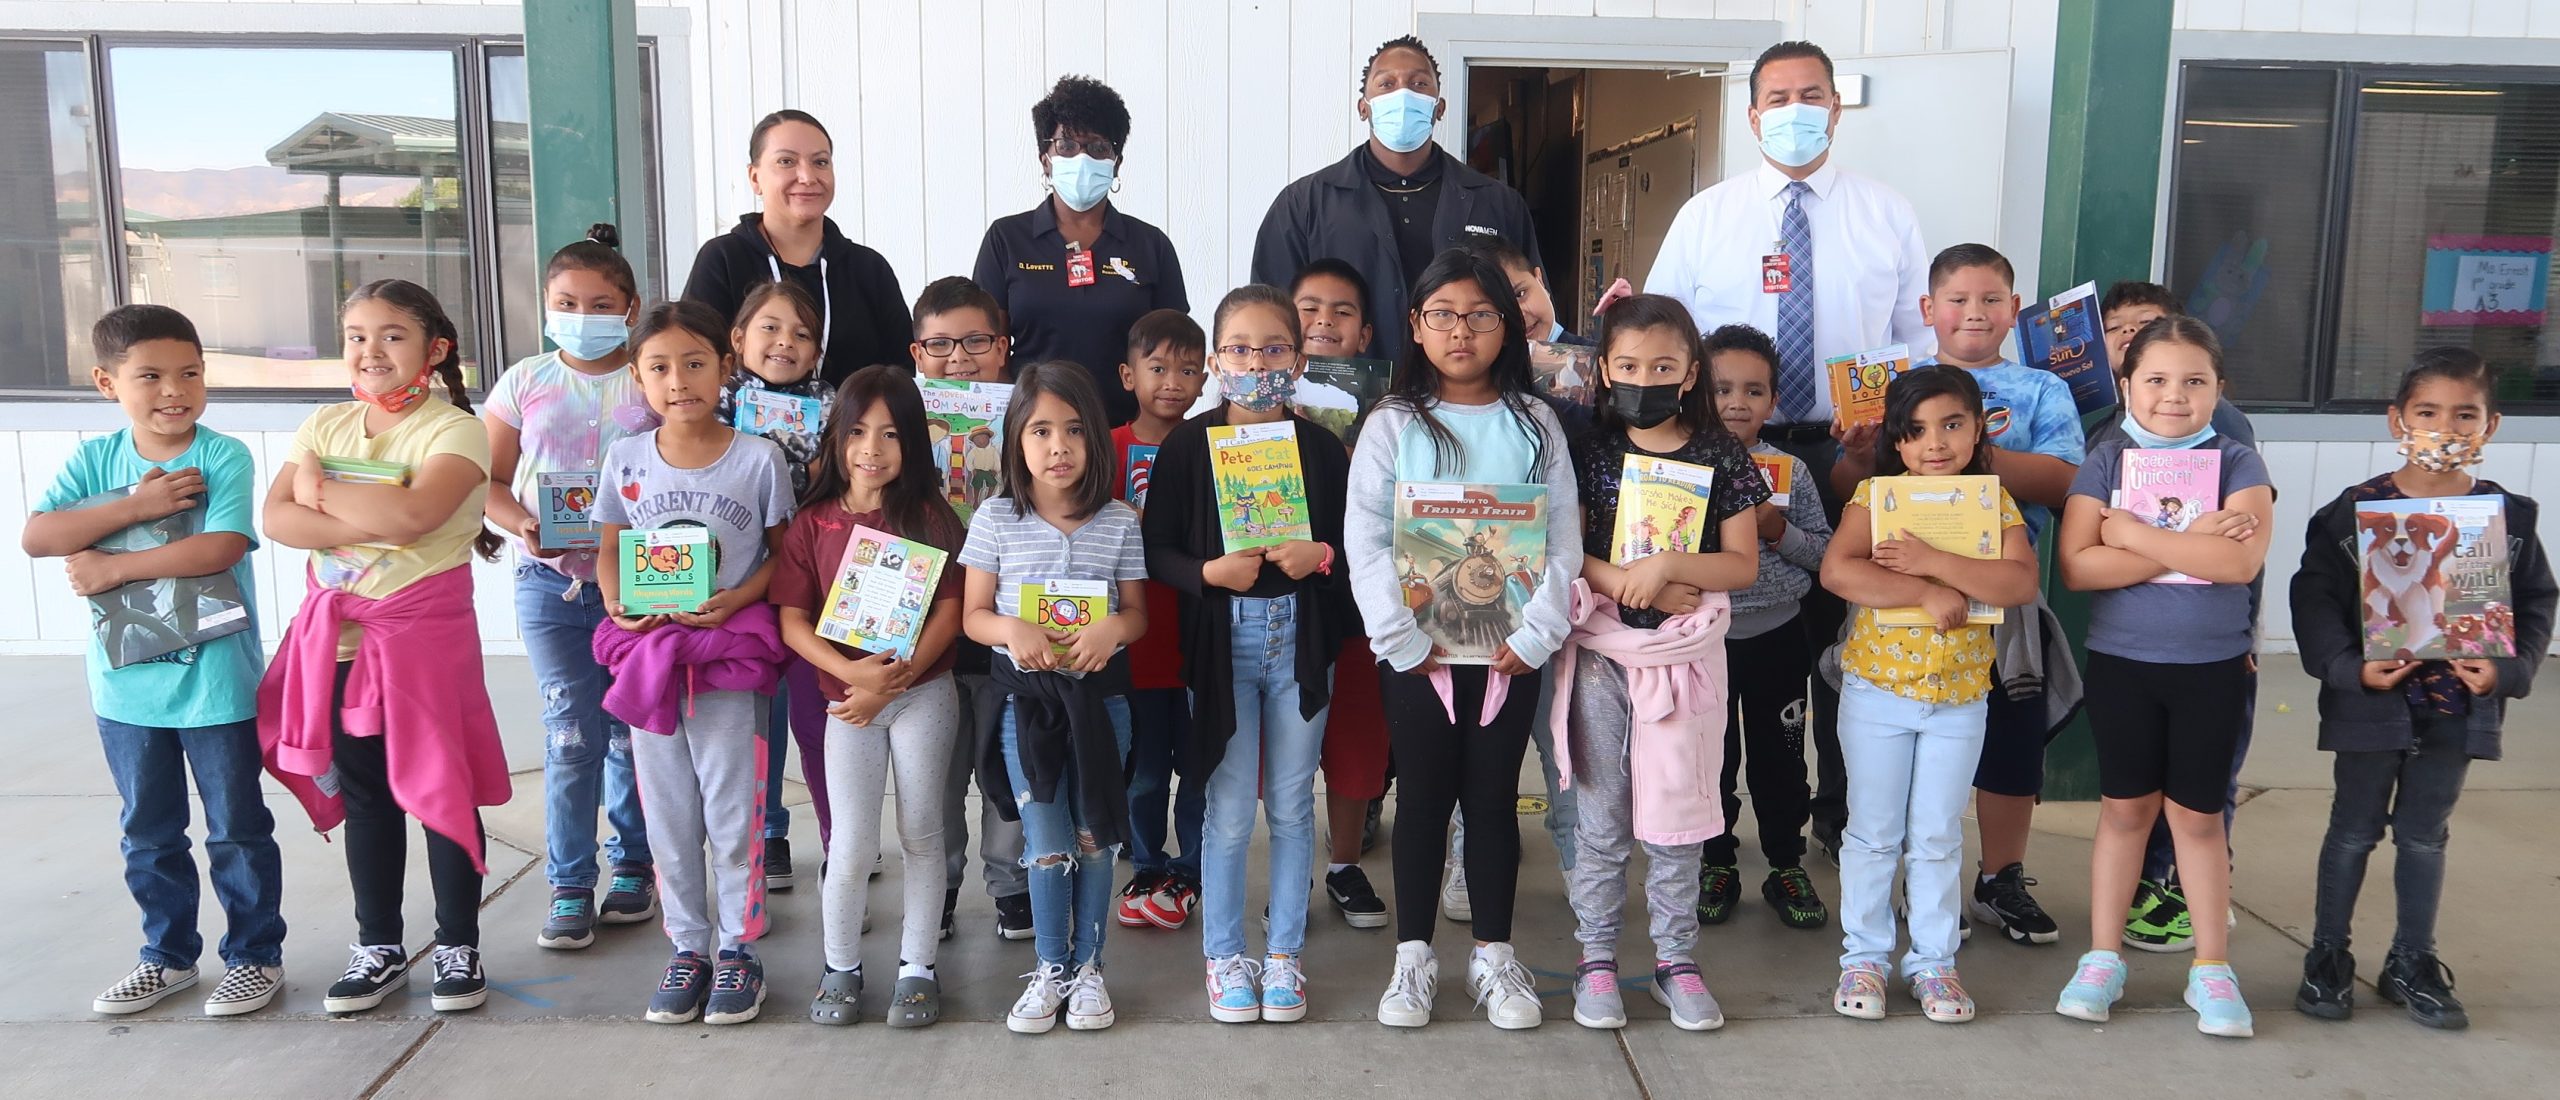 Avenal prison staff and students with books.